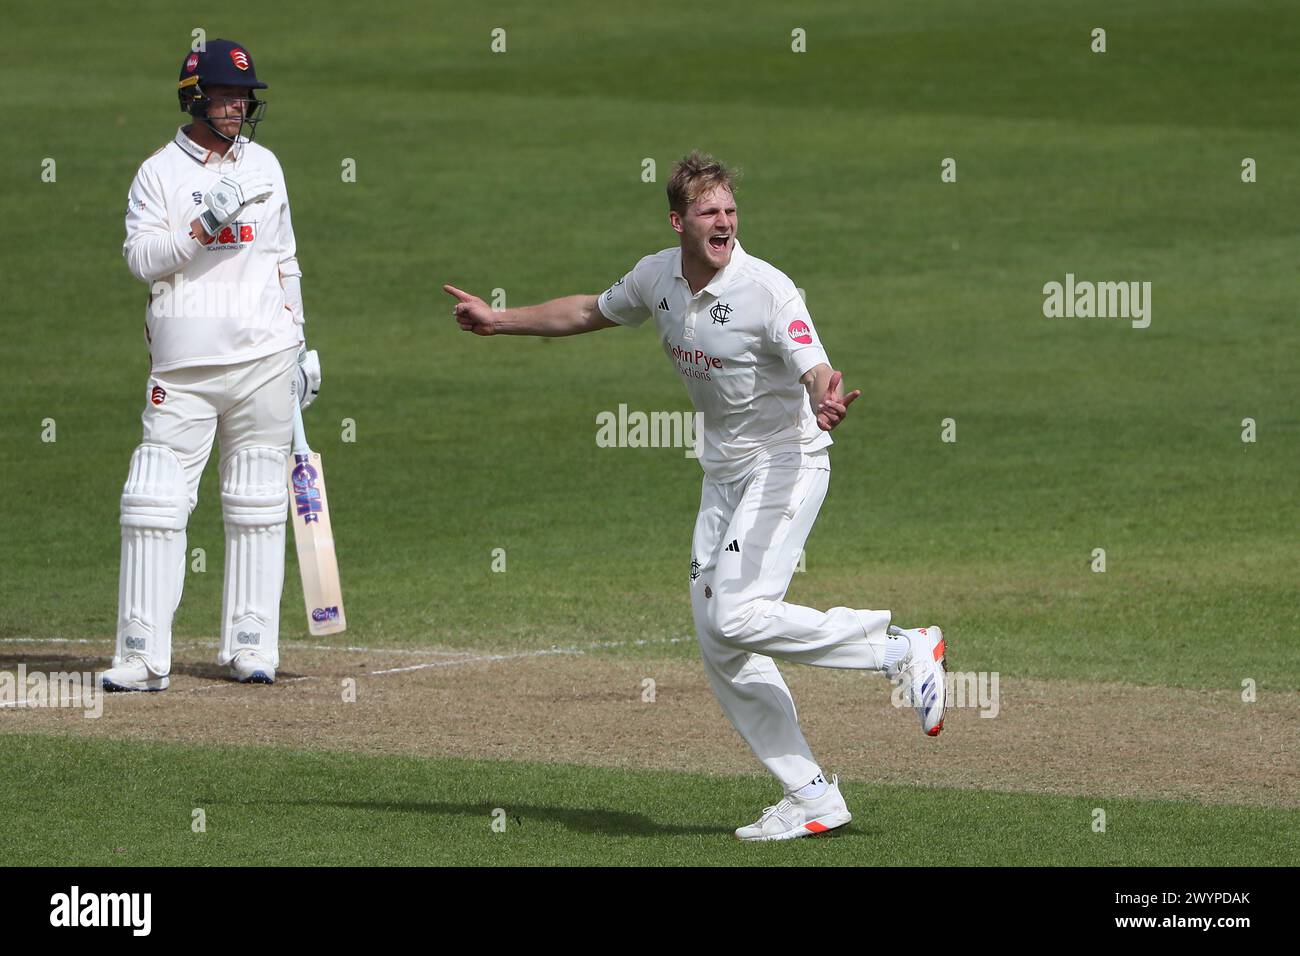 Dillon Pennington of Nottinghamshire celebrates taking the wicket of Tom Westley during Nottinghamshire CCC vs Essex CCC, Vitality County Championship Stock Photo